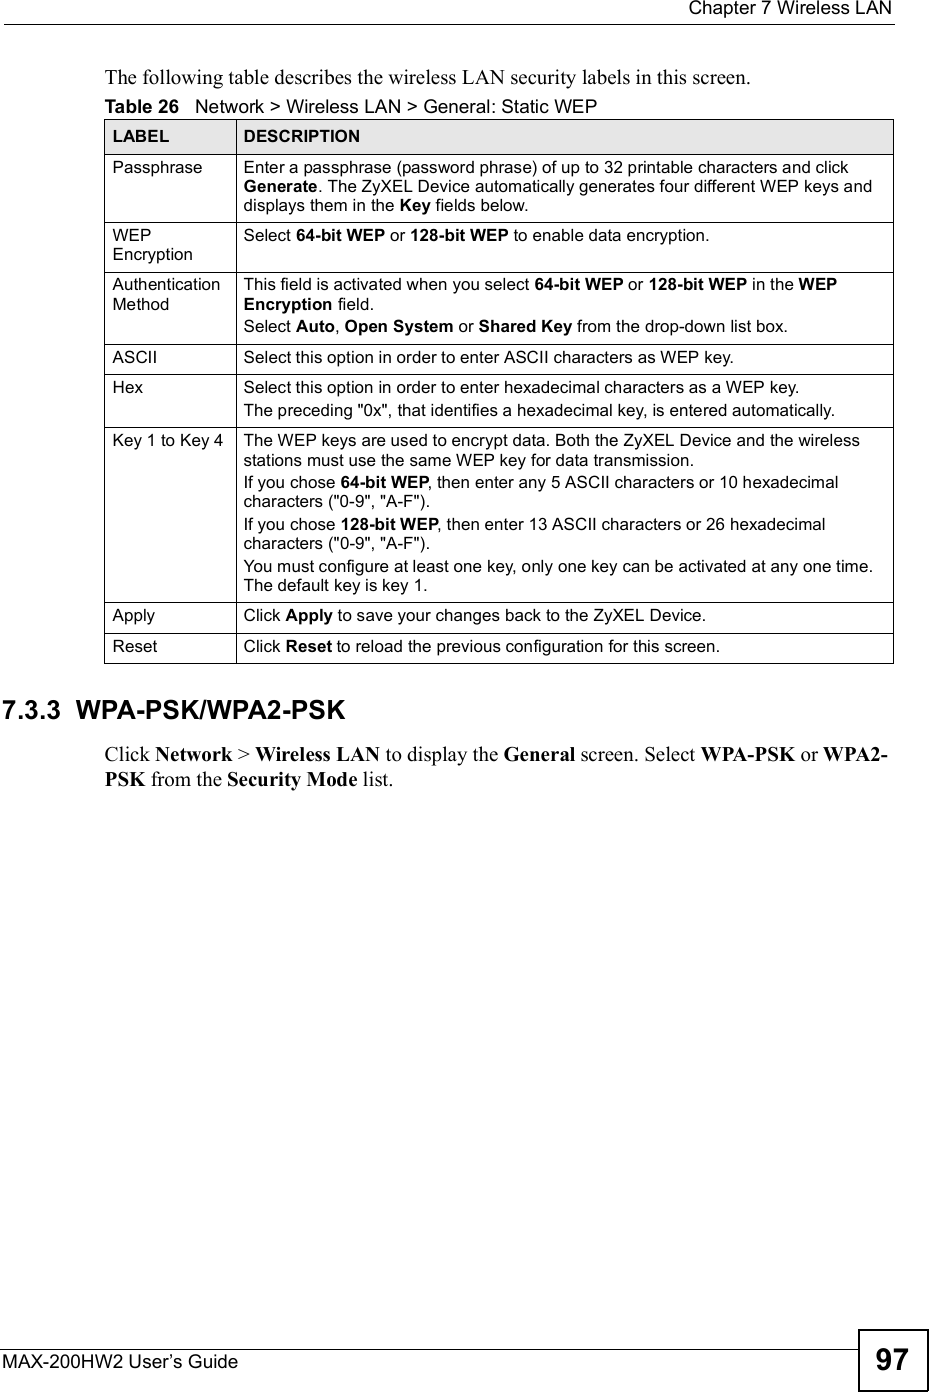  Chapter 7Wireless LANMAX-200HW2 User s Guide 97The following table describes the wireless LAN security labels in this screen.7.3.3  WPA-PSK/WPA2-PSKClick Network &gt; Wireless LAN to display the General screen. Select WPA-PSK or WPA2-PSK from the Security Mode list.Table 26   Network &gt; Wireless LAN &gt; General: Static WEPLABEL DESCRIPTIONPassphrase Enter a passphrase (password phrase) of up to 32 printable characters and click Generate. The ZyXEL Device automatically generates four different WEP keys and displays them in the Key fields below.WEPEncryptionSelect 64-bit WEP or 128-bit WEP to enable data encryption.Authentication MethodThis field is activated when you select 64-bit WEP or 128-bit WEP in the WEP Encryption field.Select Auto,Open System or Shared Key from the drop-down list box. ASCII Select this option in order to enter ASCII characters as WEP key. Hex Select this option in order to enter hexadecimal characters as a WEP key. The preceding &quot;0x&quot;, that identifies a hexadecimal key, is entered automatically.Key 1 to Key 4 The WEP keys are used to encrypt data. Both the ZyXEL Device and the wireless stations must use the same WEP key for data transmission.If you chose 64-bit WEP, then enter any 5 ASCII characters or 10 hexadecimal characters (&quot;0-9&quot;, &quot;A-F&quot;).If you chose 128-bit WEP, then enter 13 ASCII characters or 26 hexadecimal characters (&quot;0-9&quot;, &quot;A-F&quot;). You must configure at least one key, only one key can be activated at any one time. The default key is key 1.Apply Click Apply to save your changes back to the ZyXEL Device.Reset Click Reset to reload the previous configuration for this screen.